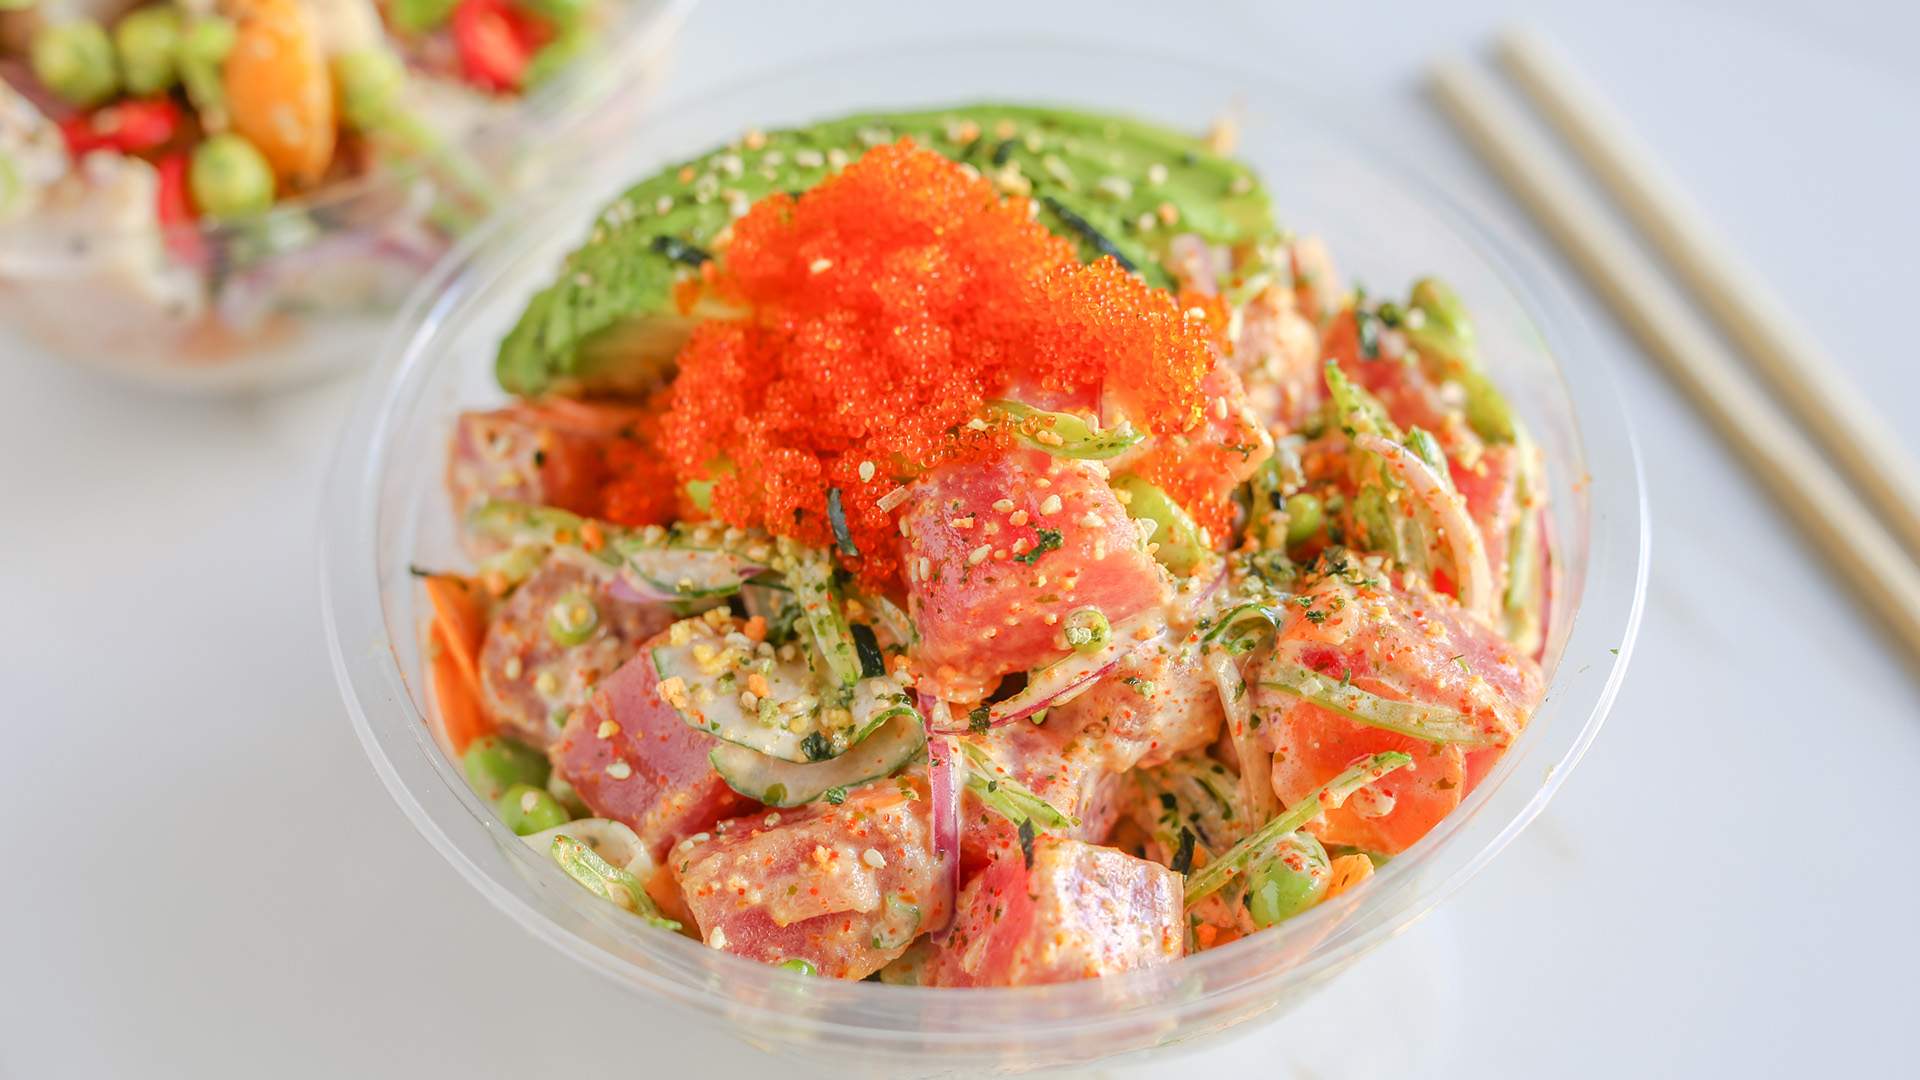 Suki's Make-Your-Own Poke Bowls and Sushi Burritos Are Coming to Bulimba